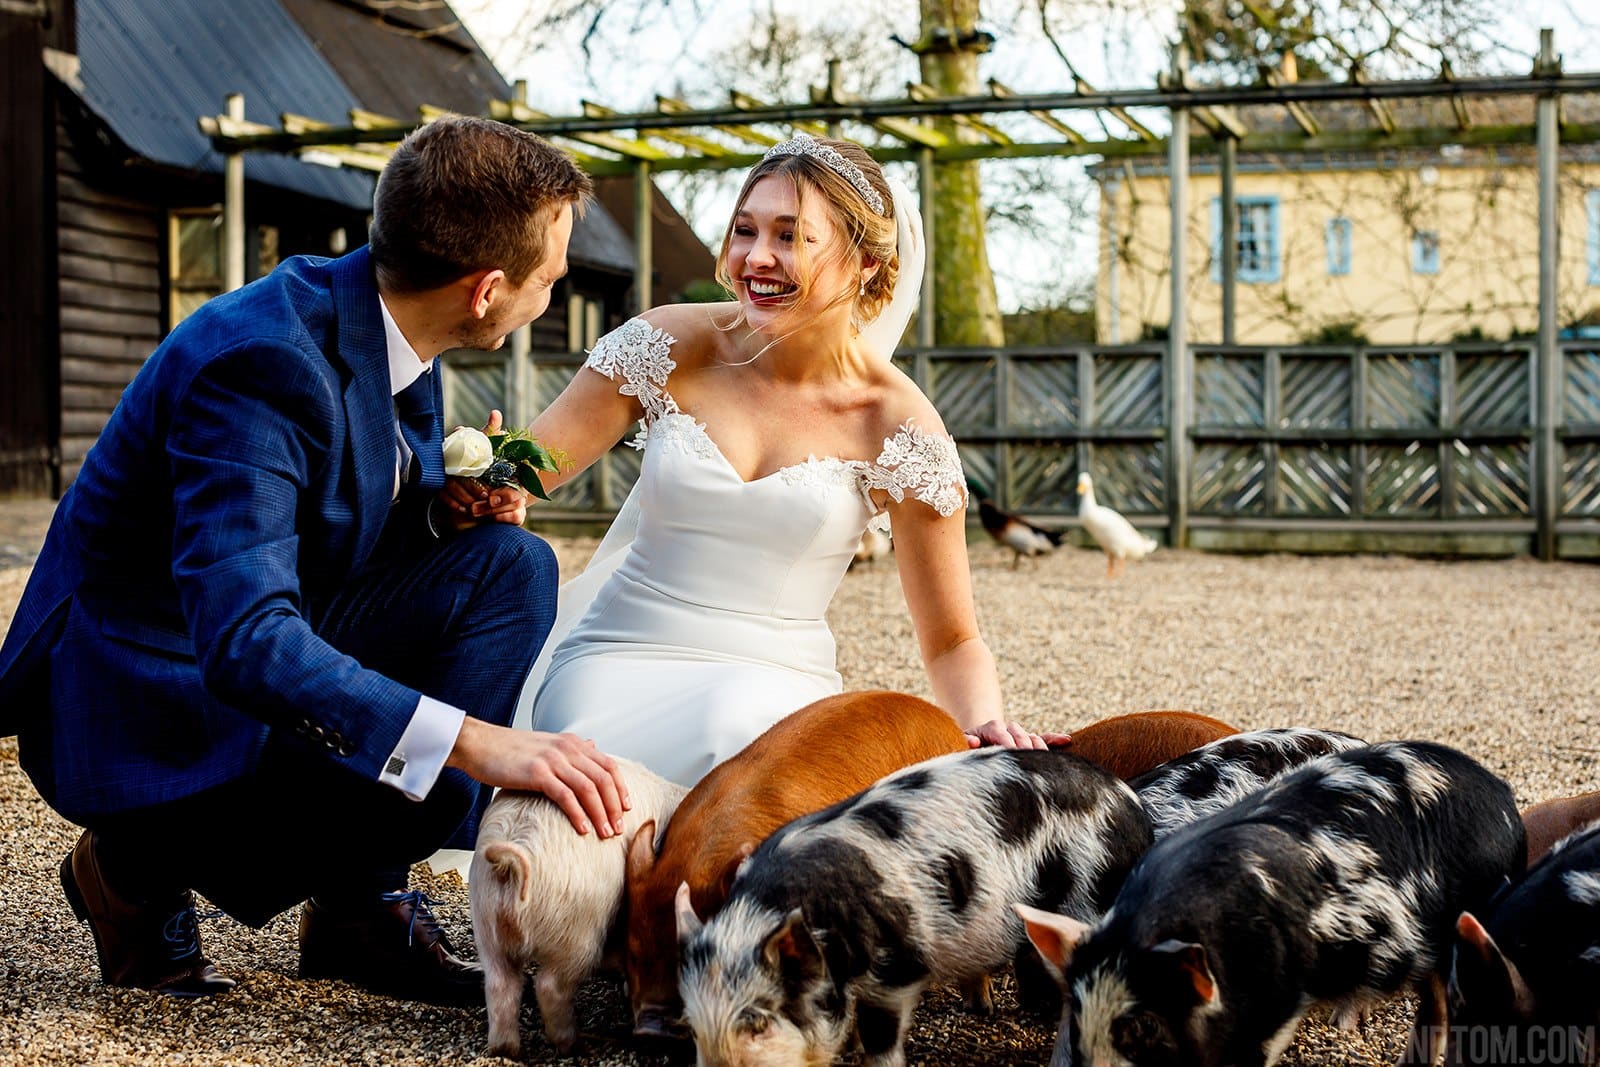 Happy couple at South Farm Wedding Bride and Groom with piglets